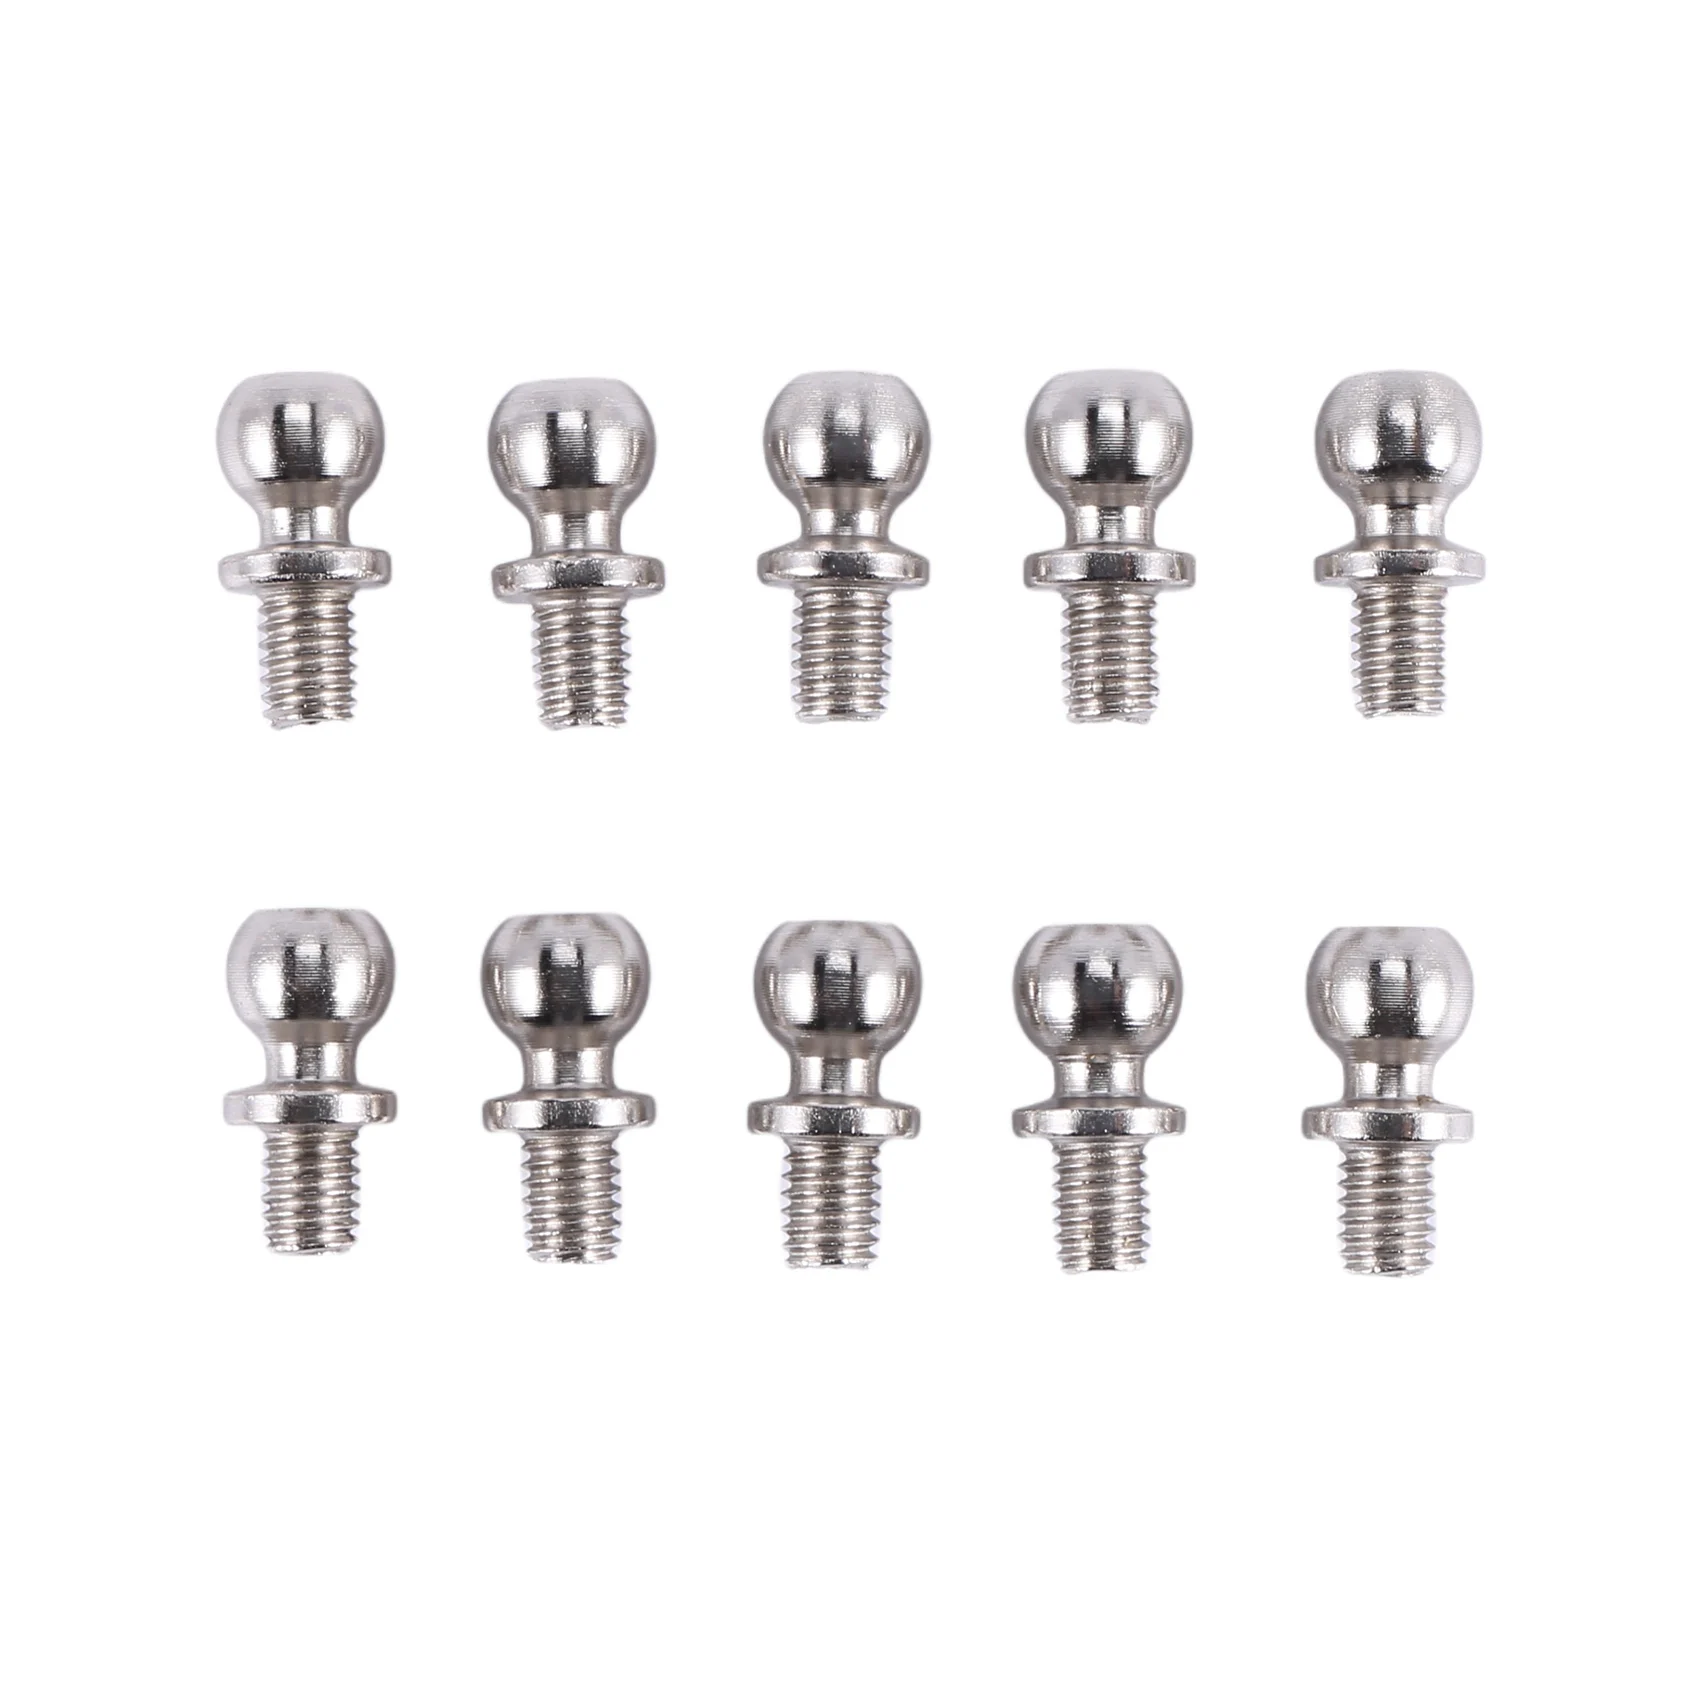 

144001-1338 Ball Head Screw for Wltoys 144001 1/14 4WD RC Car Spare Parts Upgrade Accessories